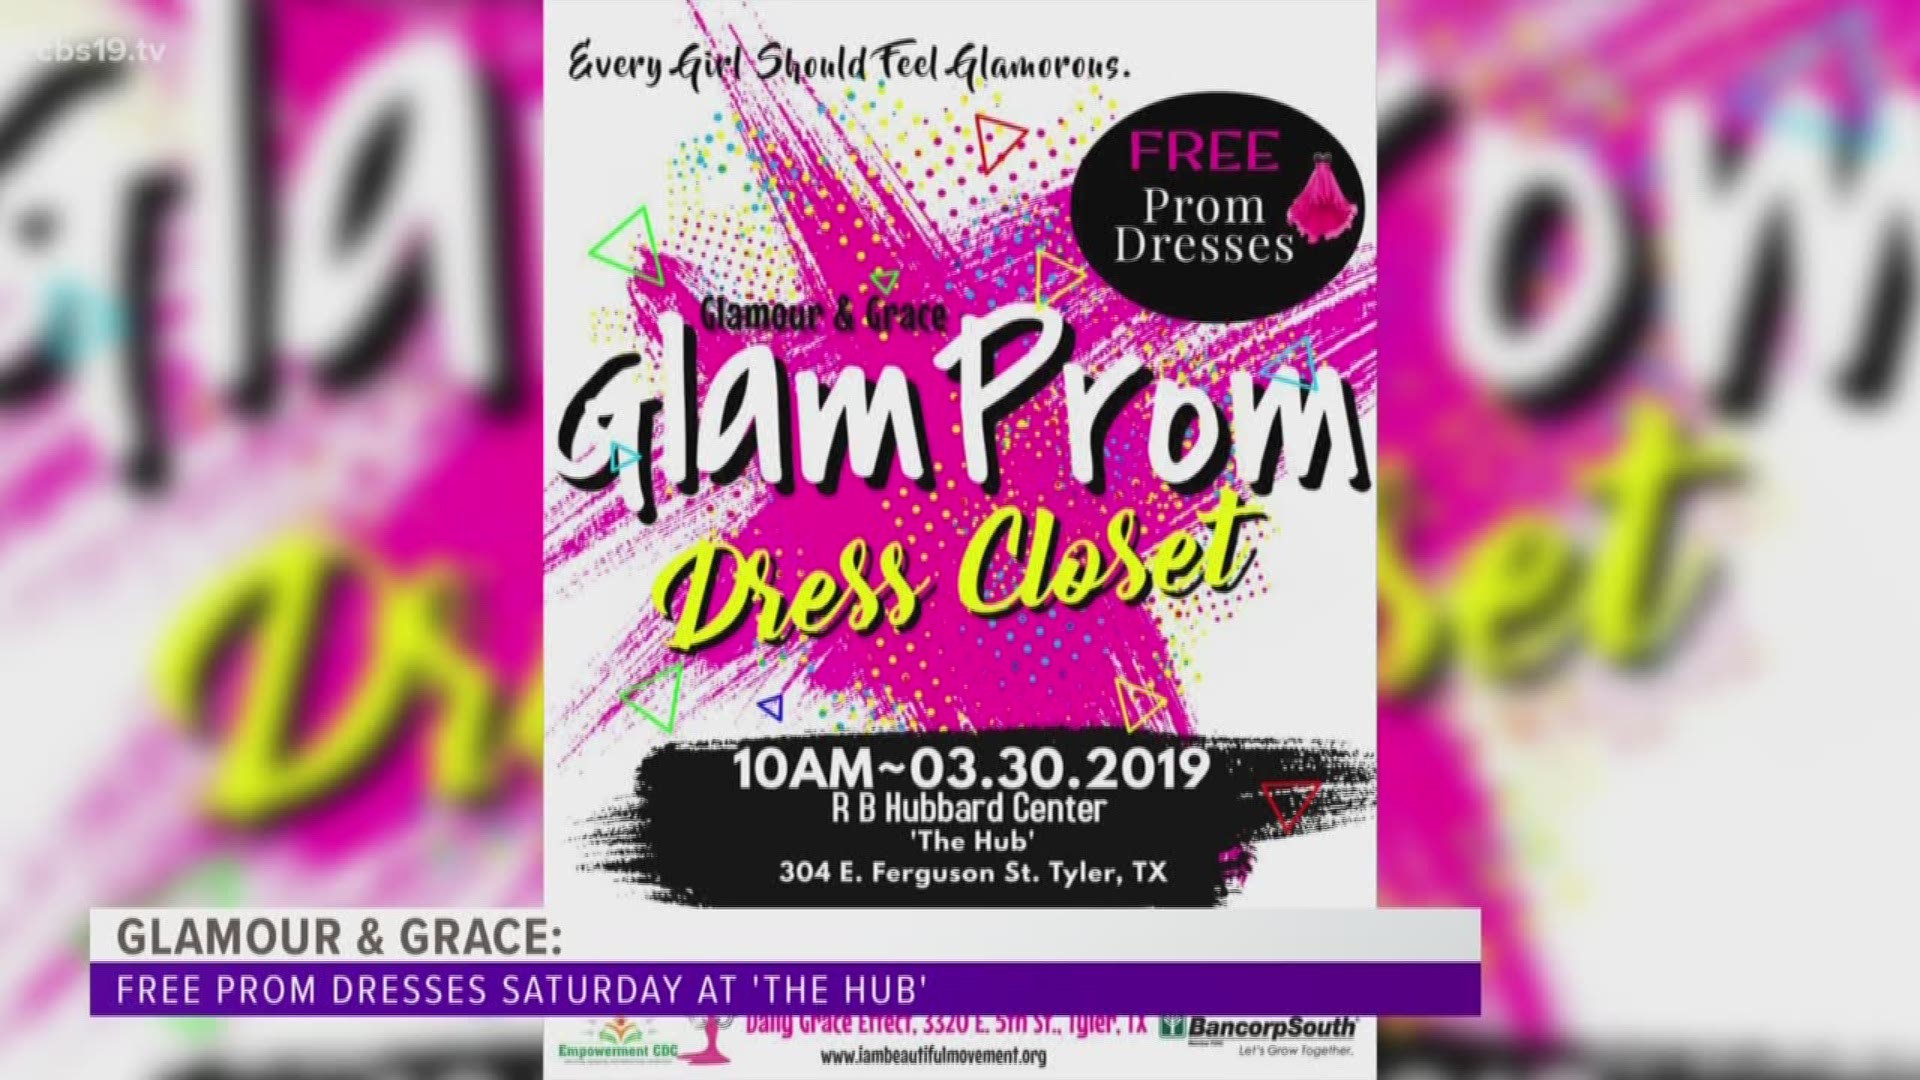 High school students across East Texas will have the opportunity to get a free prom dress Saturday at the 'Hub.'